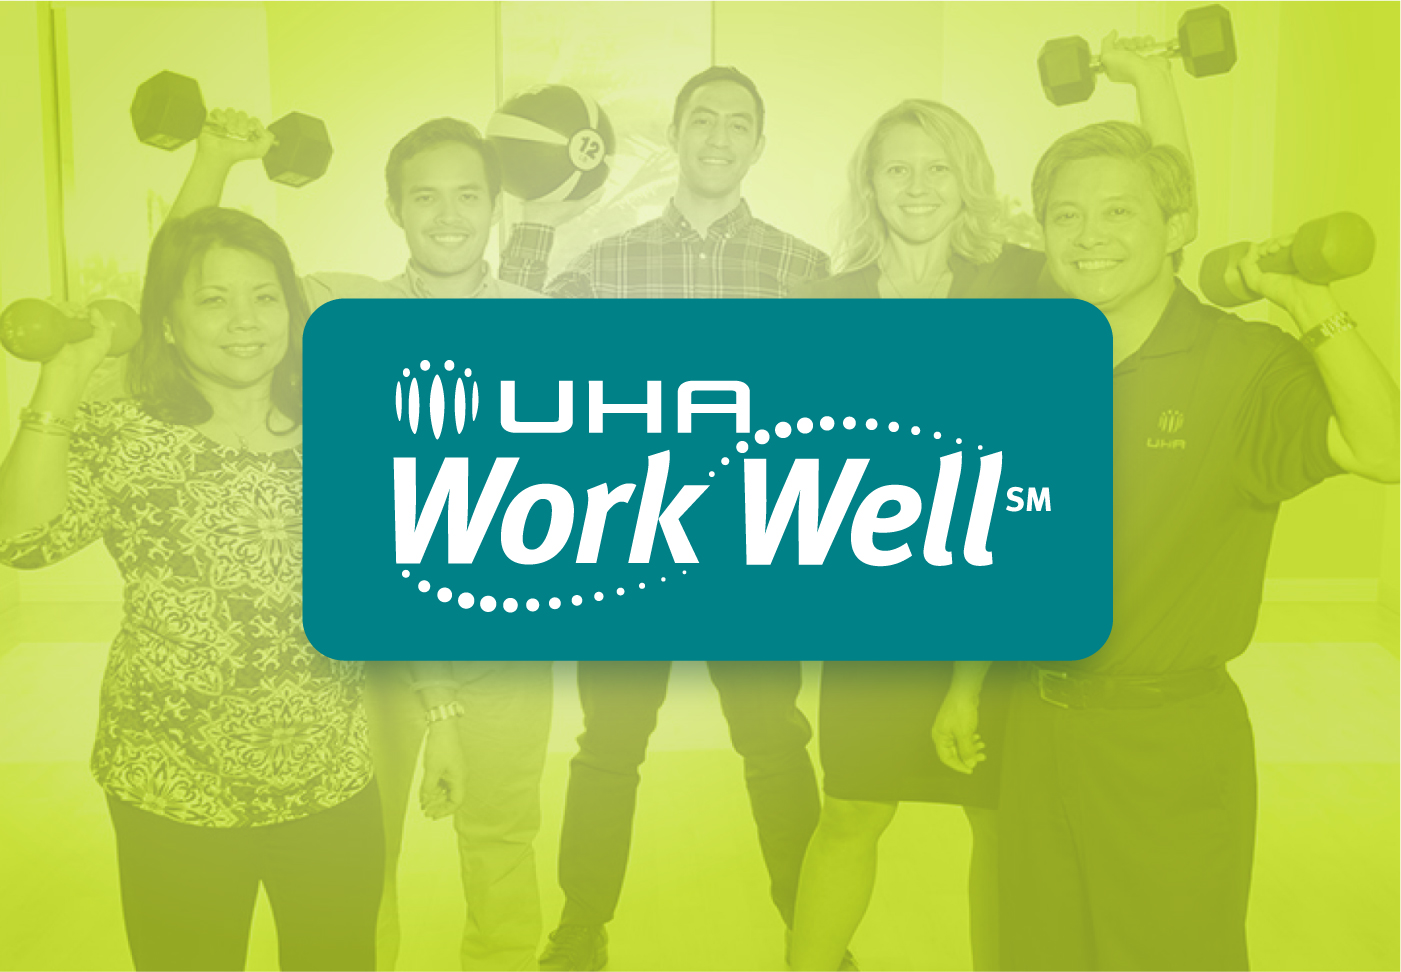 About UHA Work Well<span>℠</span>